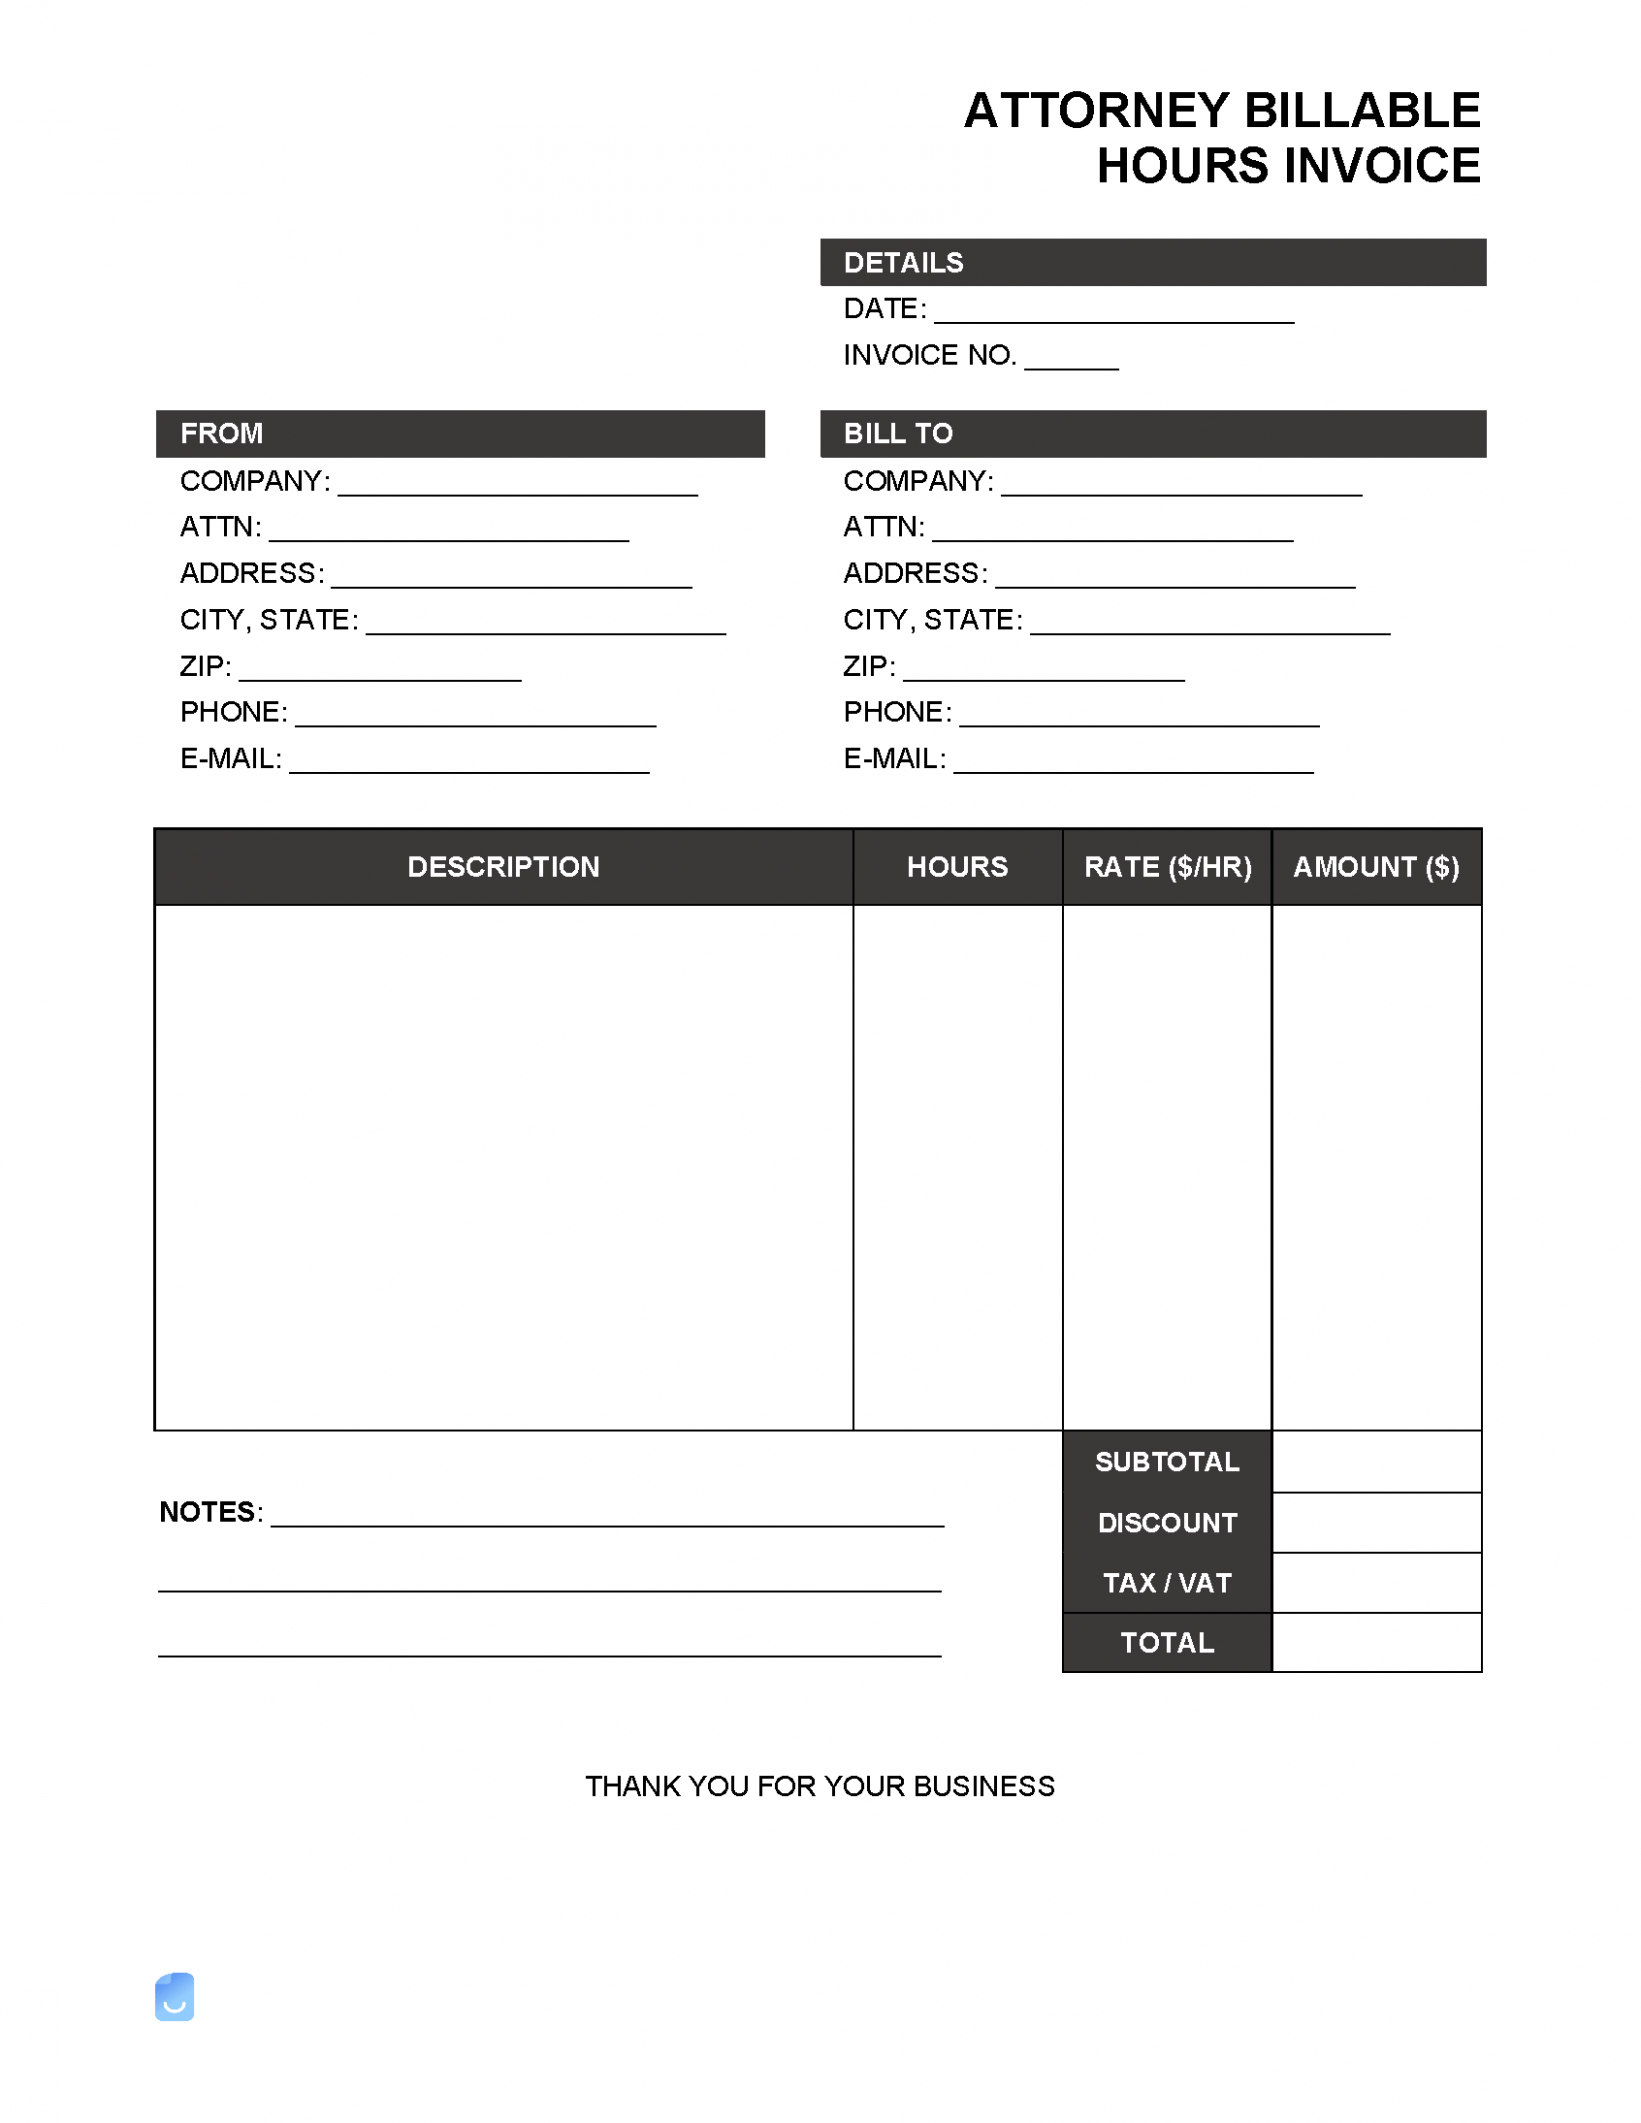 Editable Attorney Billable Hours Invoice Template Doc